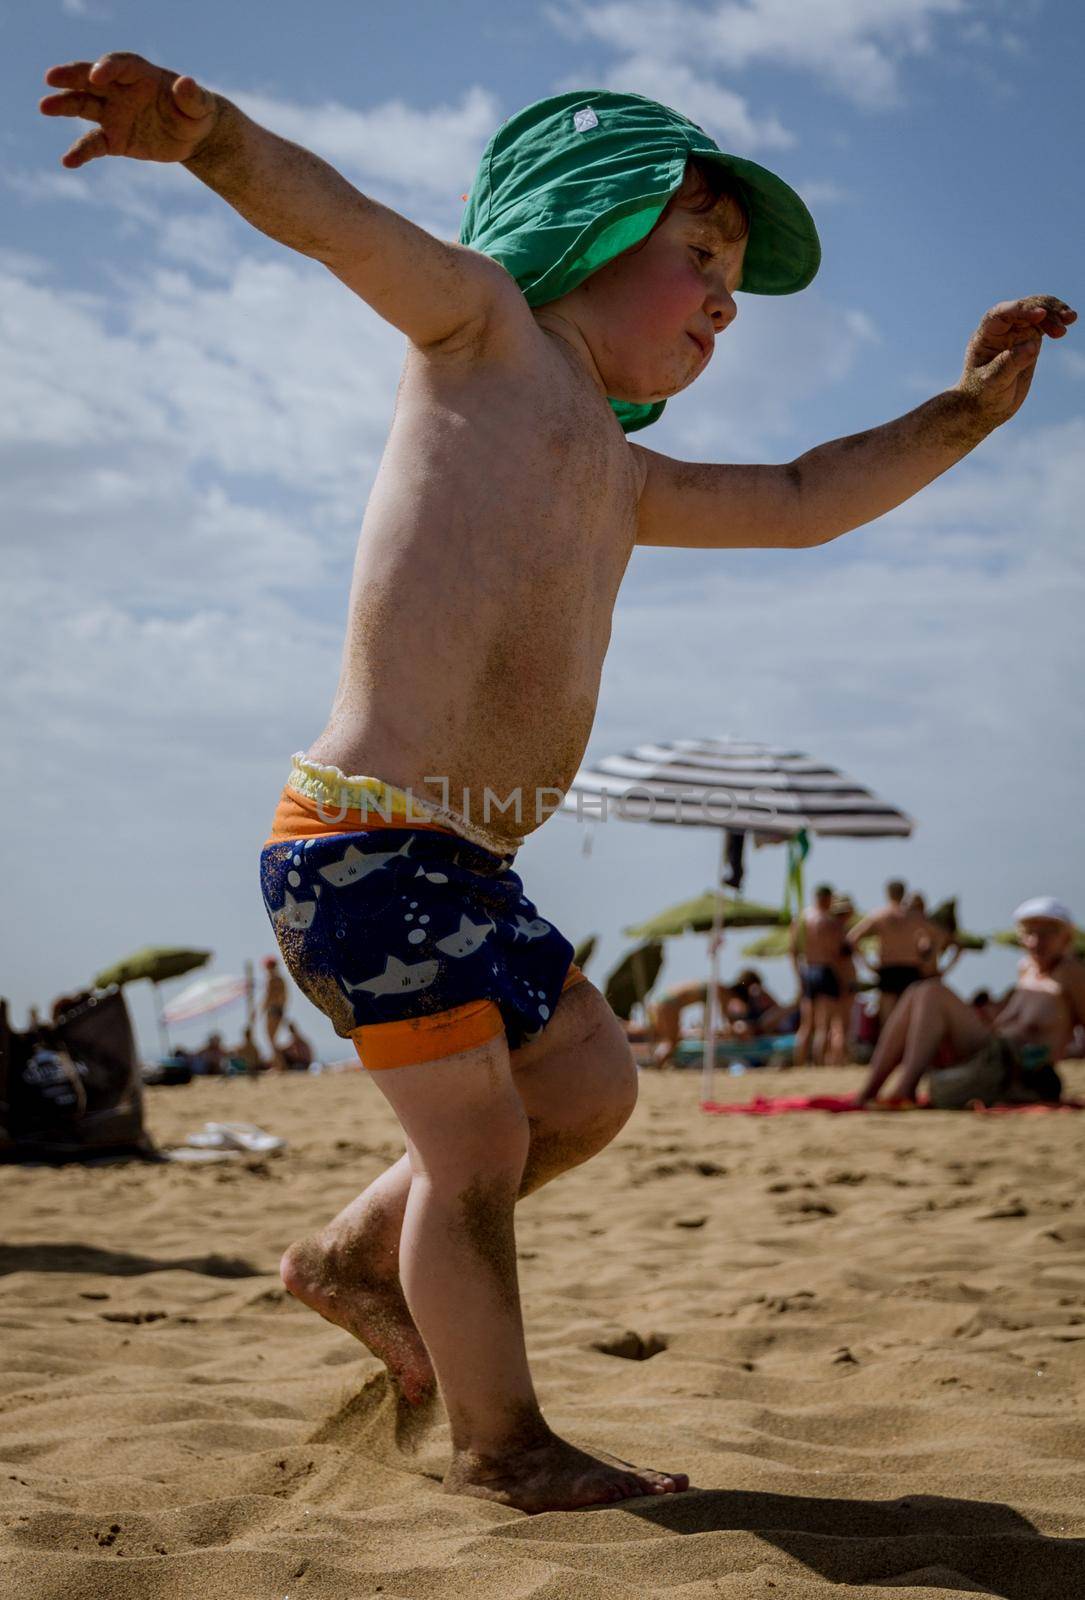 A cute, red head baby boy wearing a green hat and swimming suit walking and playing in the sand